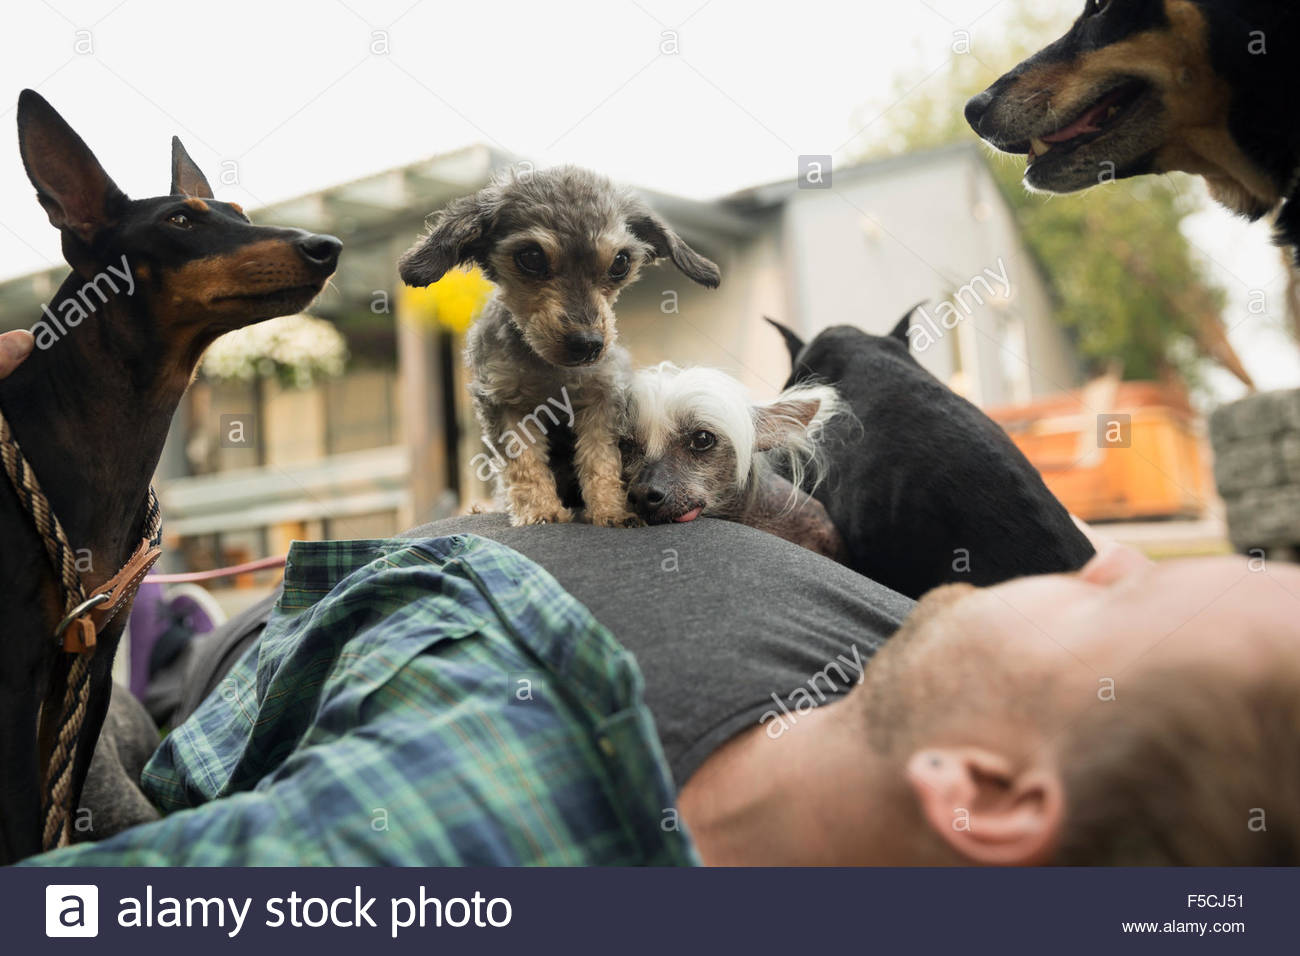 Dogs laying on top of man Stock Photo